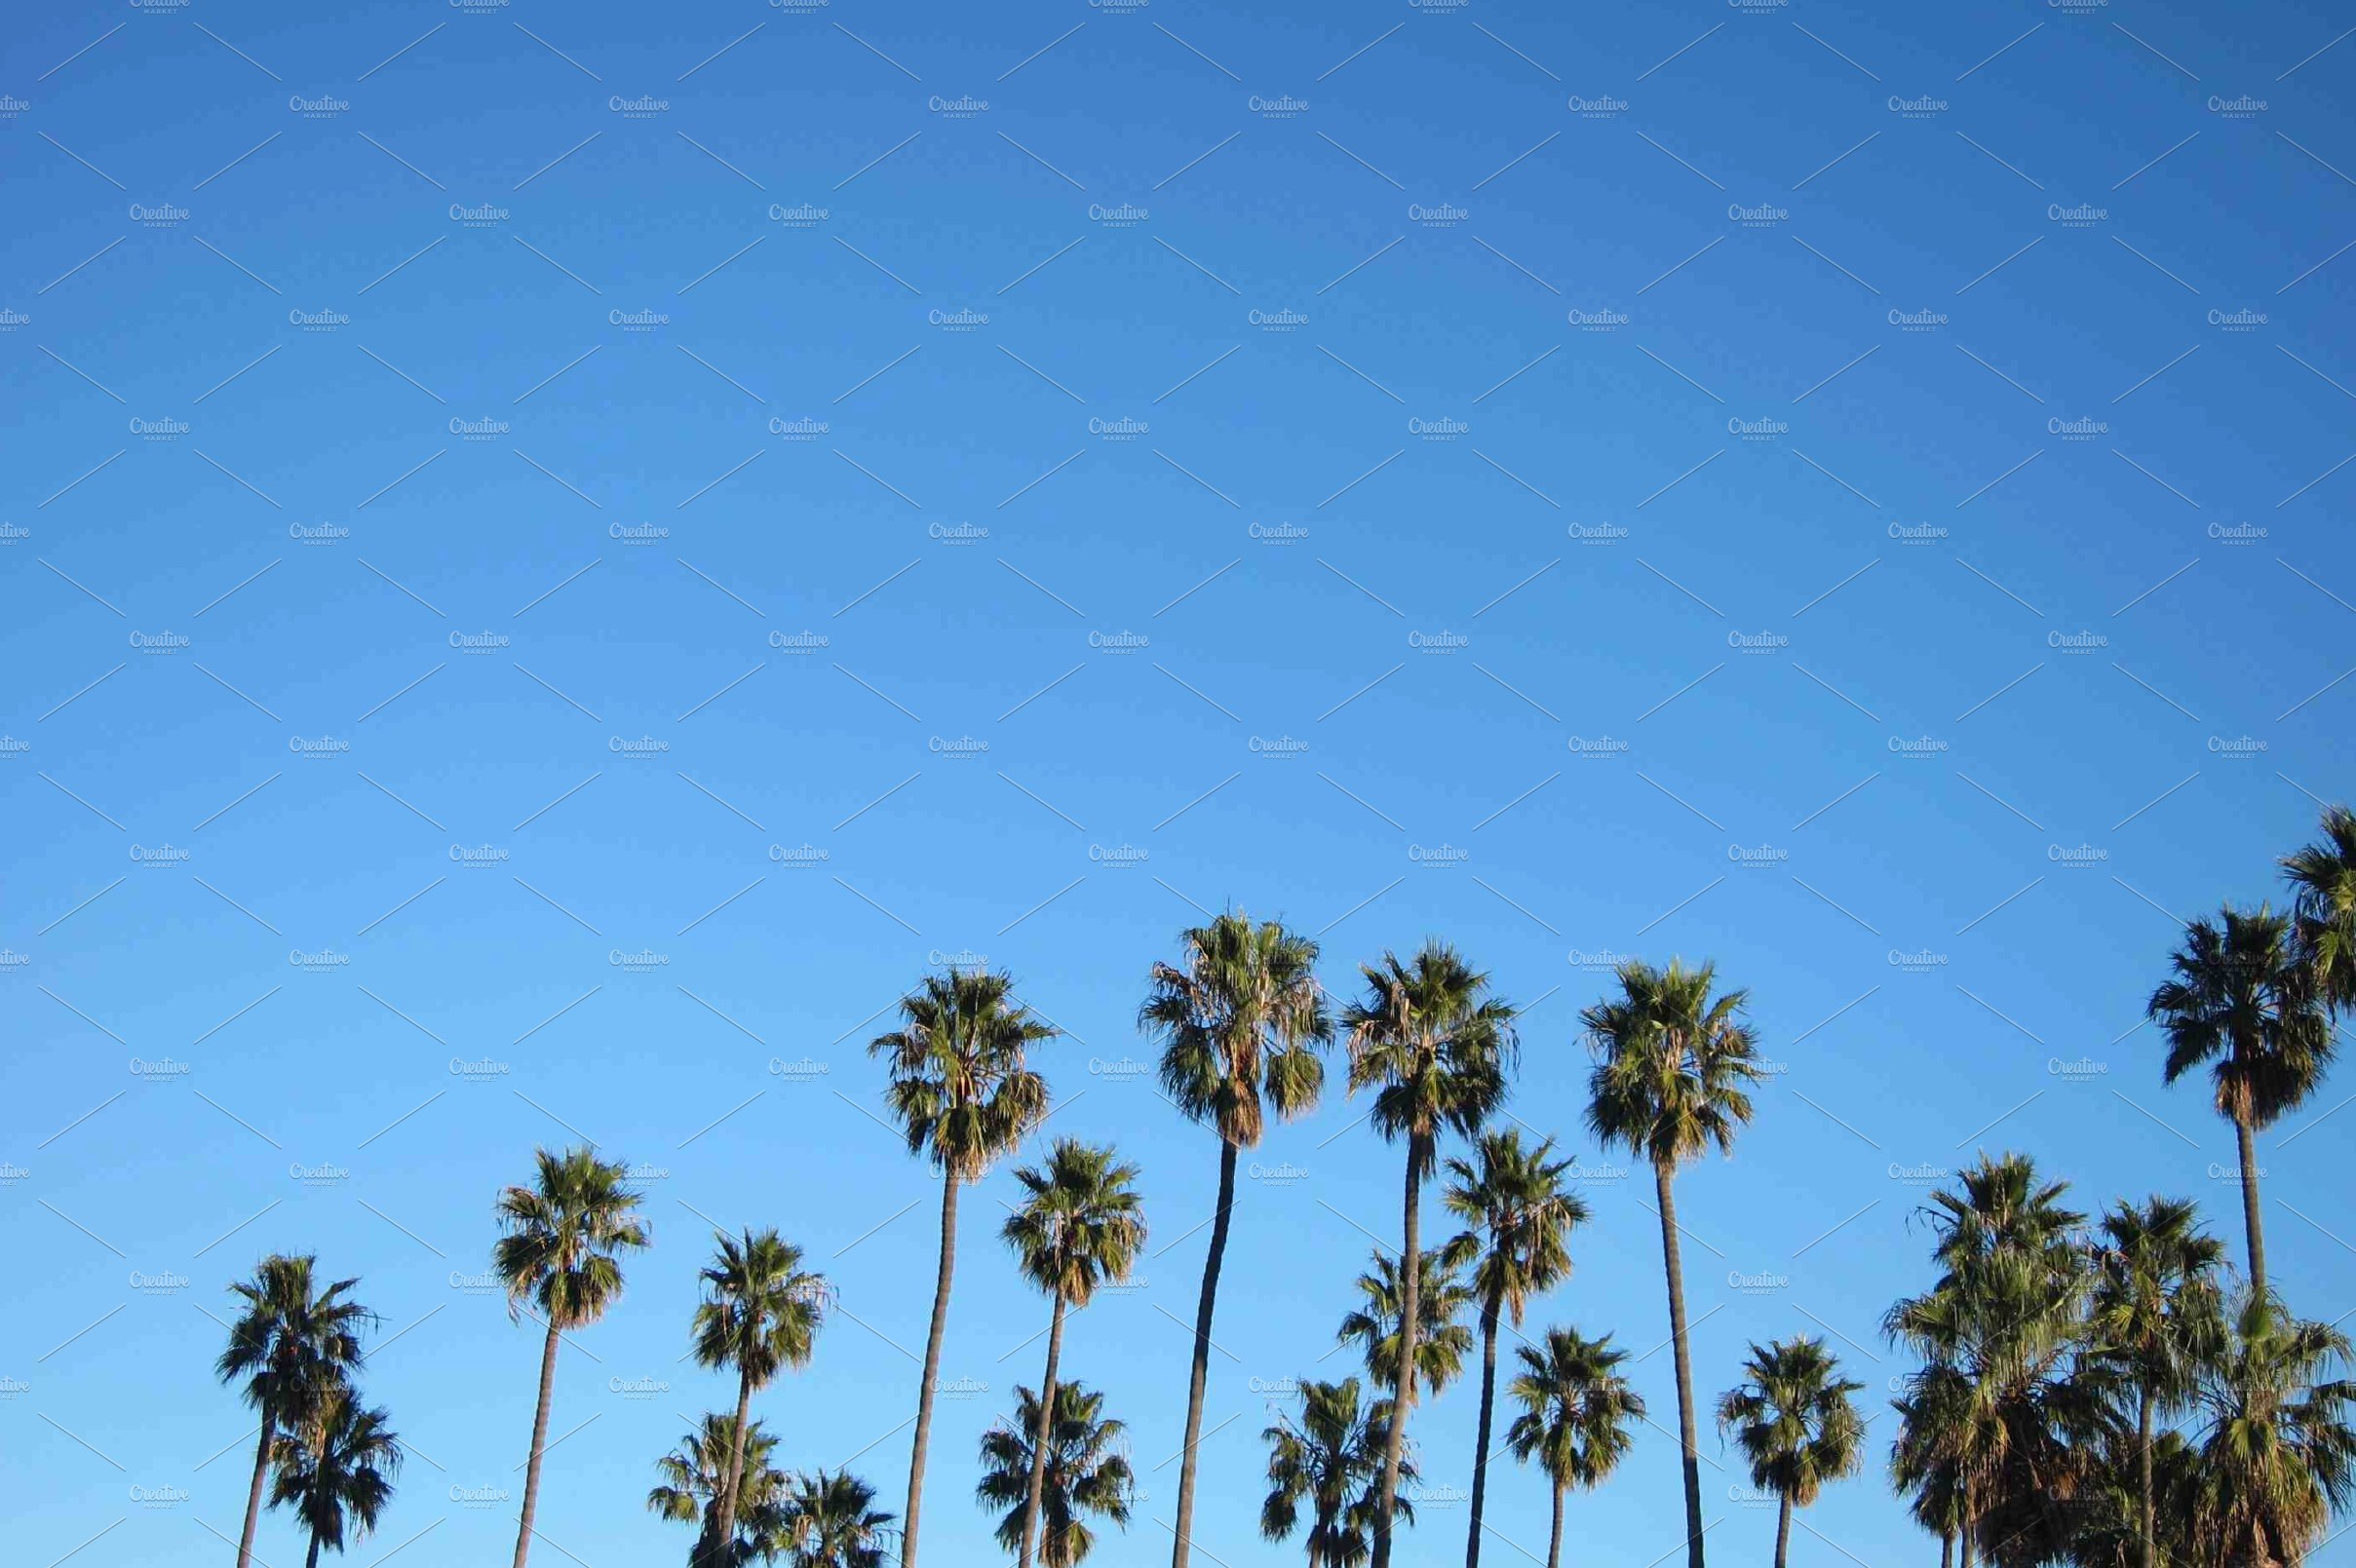 Group of palm trees against a blue sky.